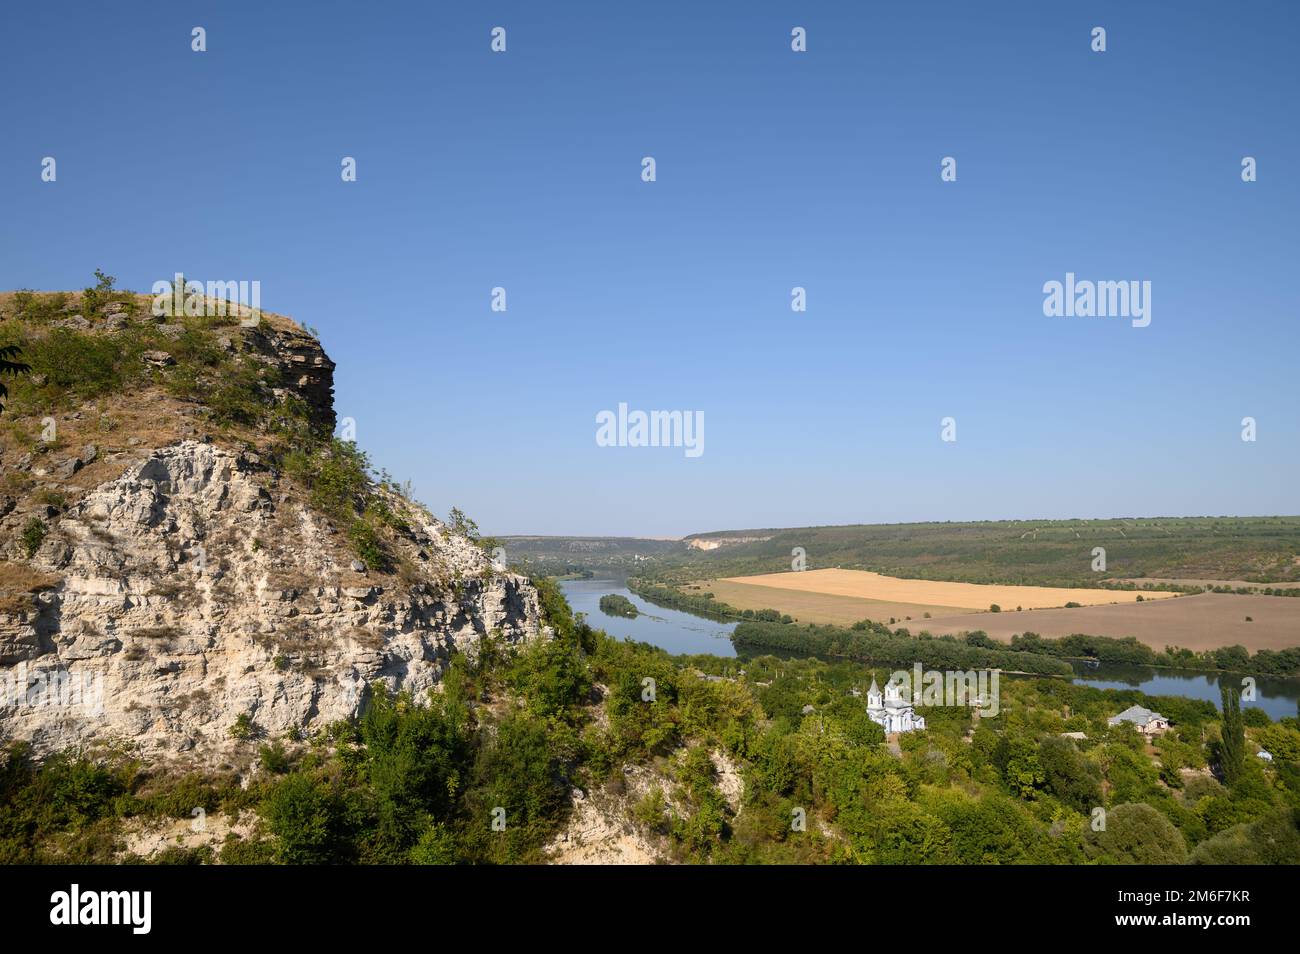 View to Socola village and Dniester river from the high cliff, Moldova Stock Photo